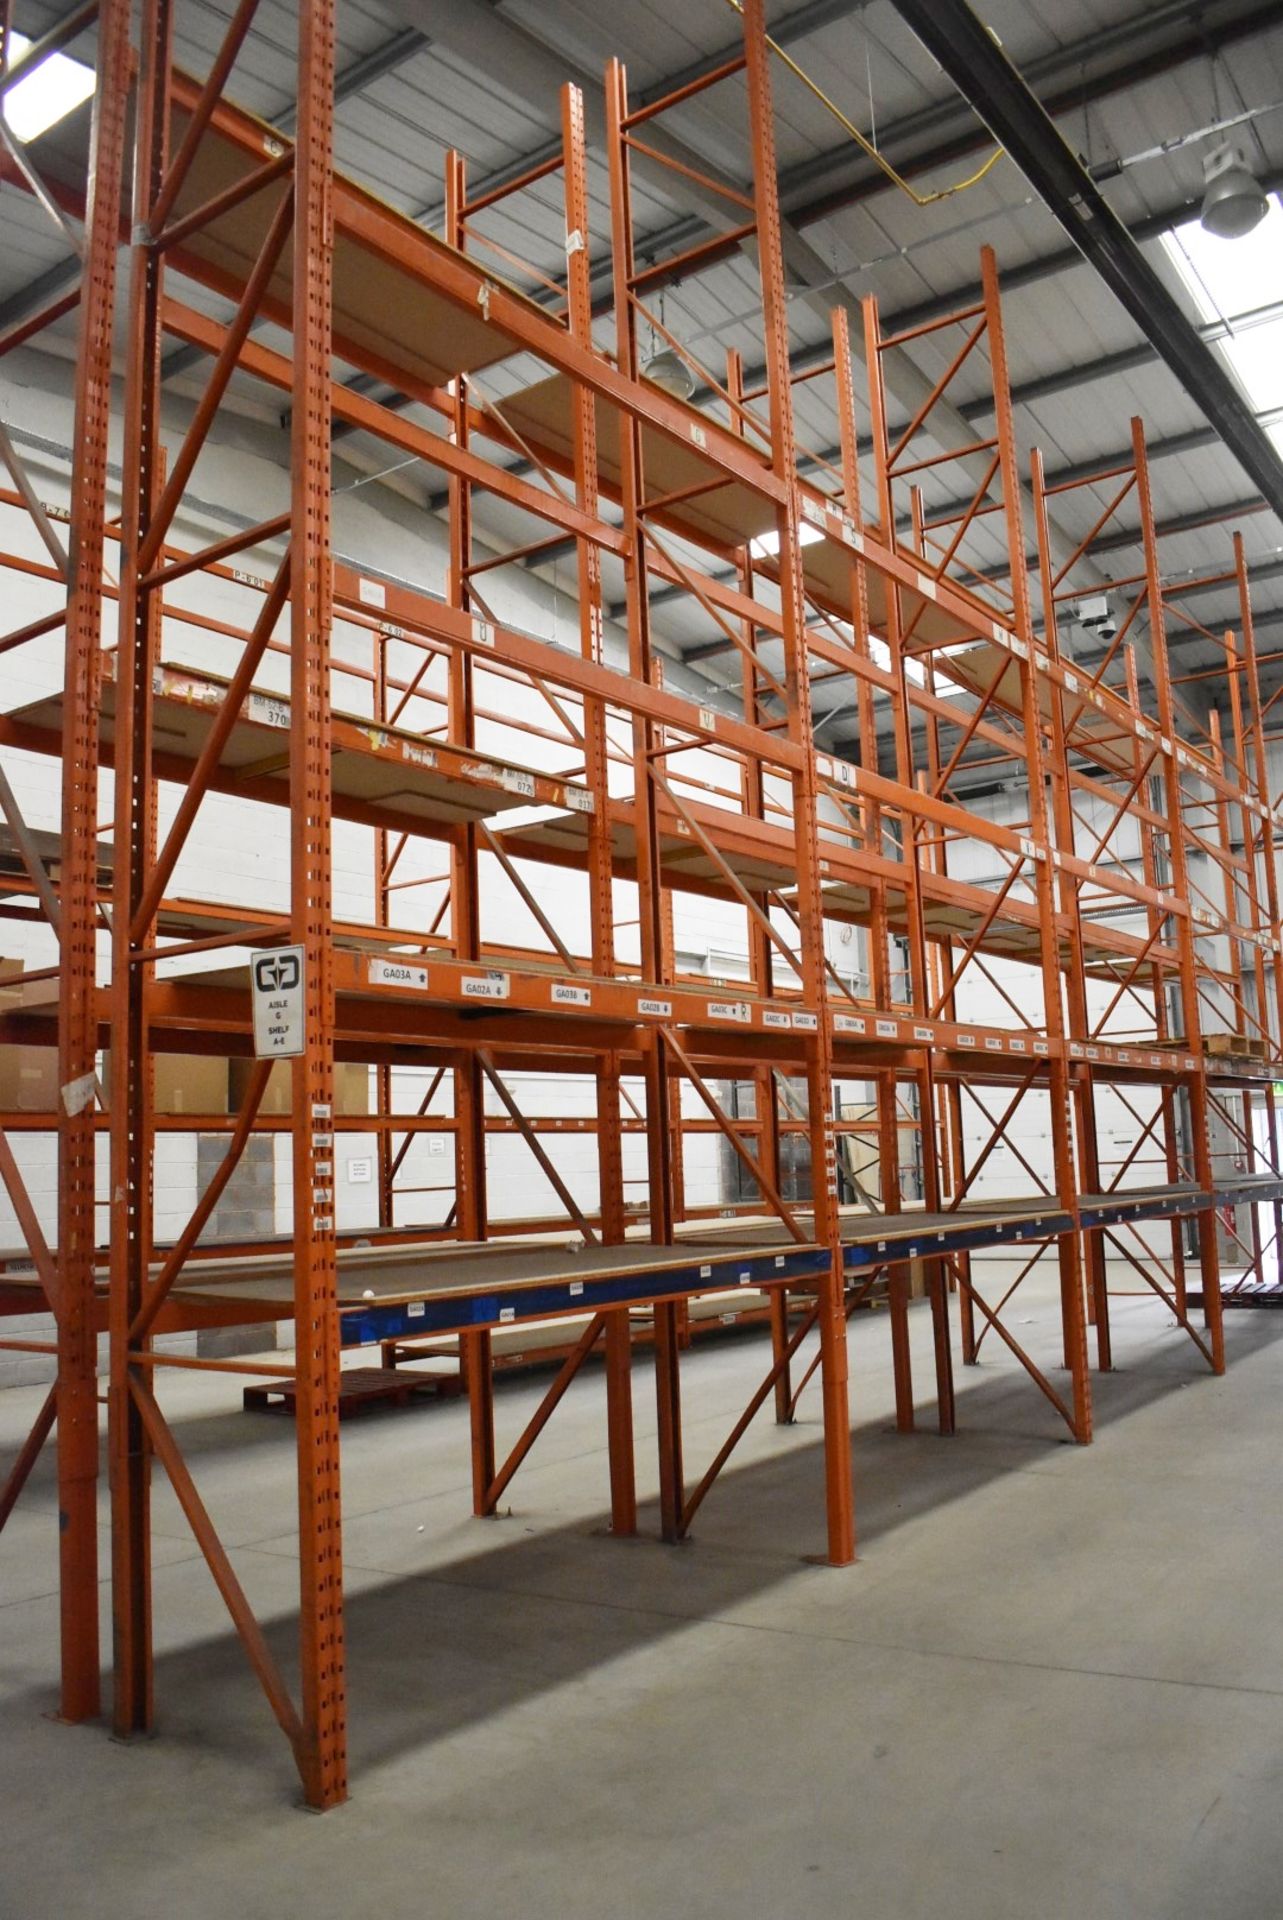 5 x Bays of RediRack Warehouse Pallet Racking - Lot Includes 6 x Uprights and 38 x Crossbeams - - Image 2 of 4